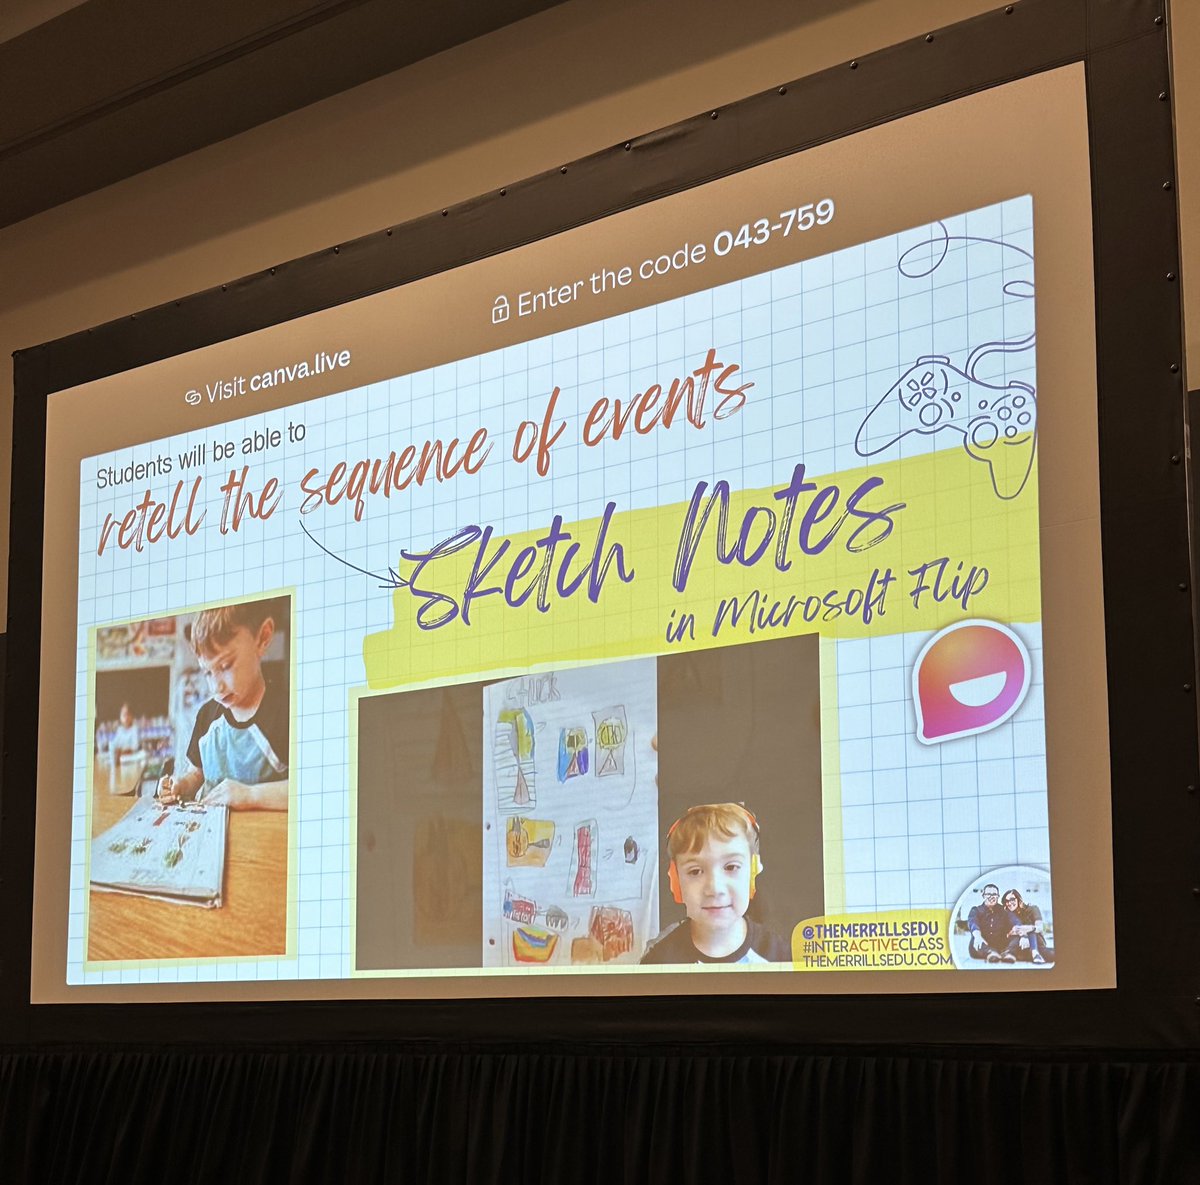 Day 2 at #TCEA23 ✌️

ALWAYS love learning from @themerrillsedu! They have endless innovative + MEANINGFUL learning ideas for @MicrosoftFlip @canva @BookCreatorApp @DoInkTweets + more👏